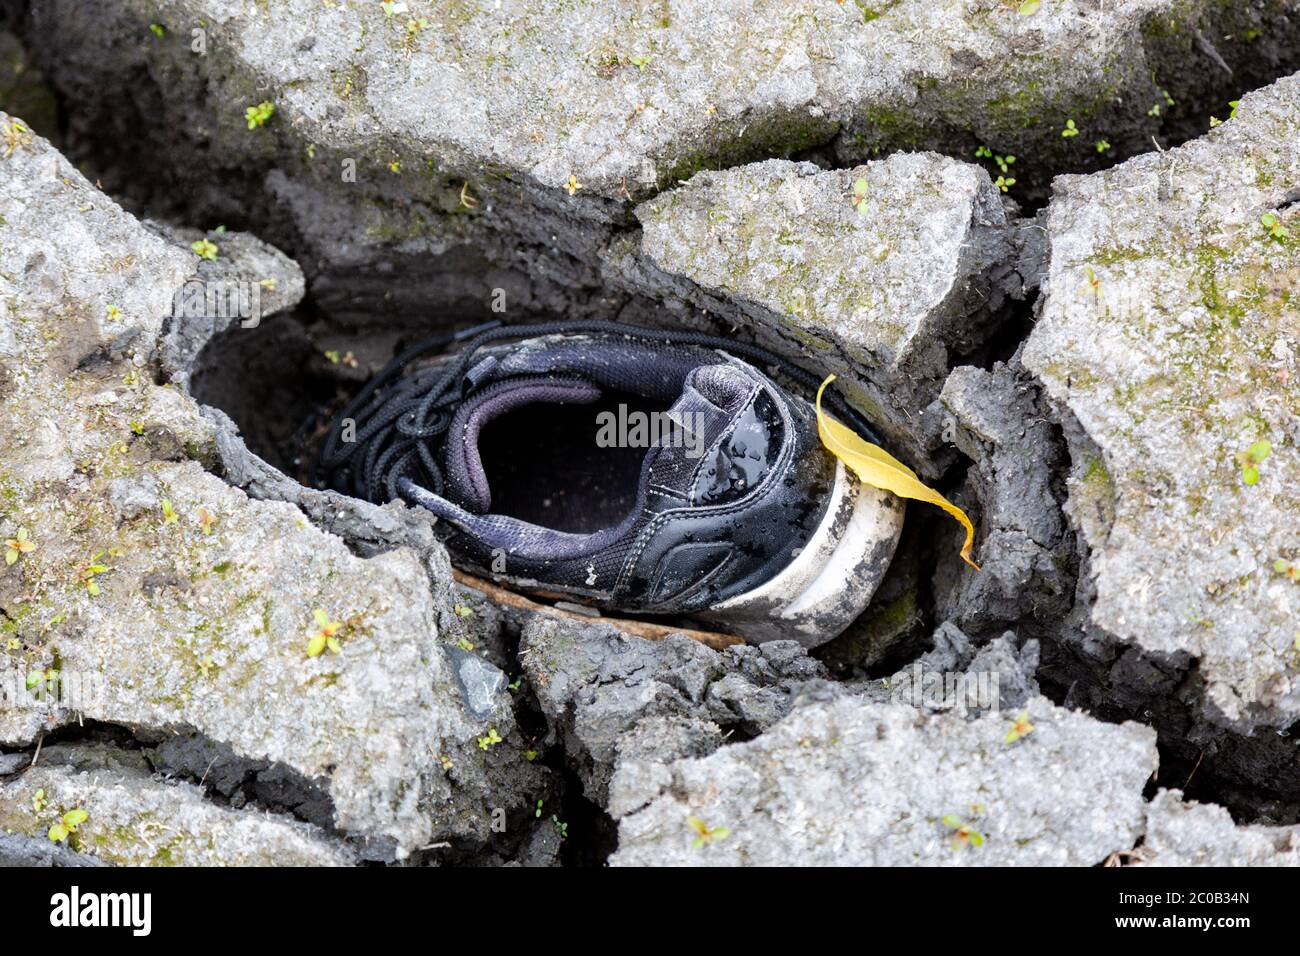 Shoe stuck in mud, dry reservoir bed in warm weather, UK 2020 Stock Photo